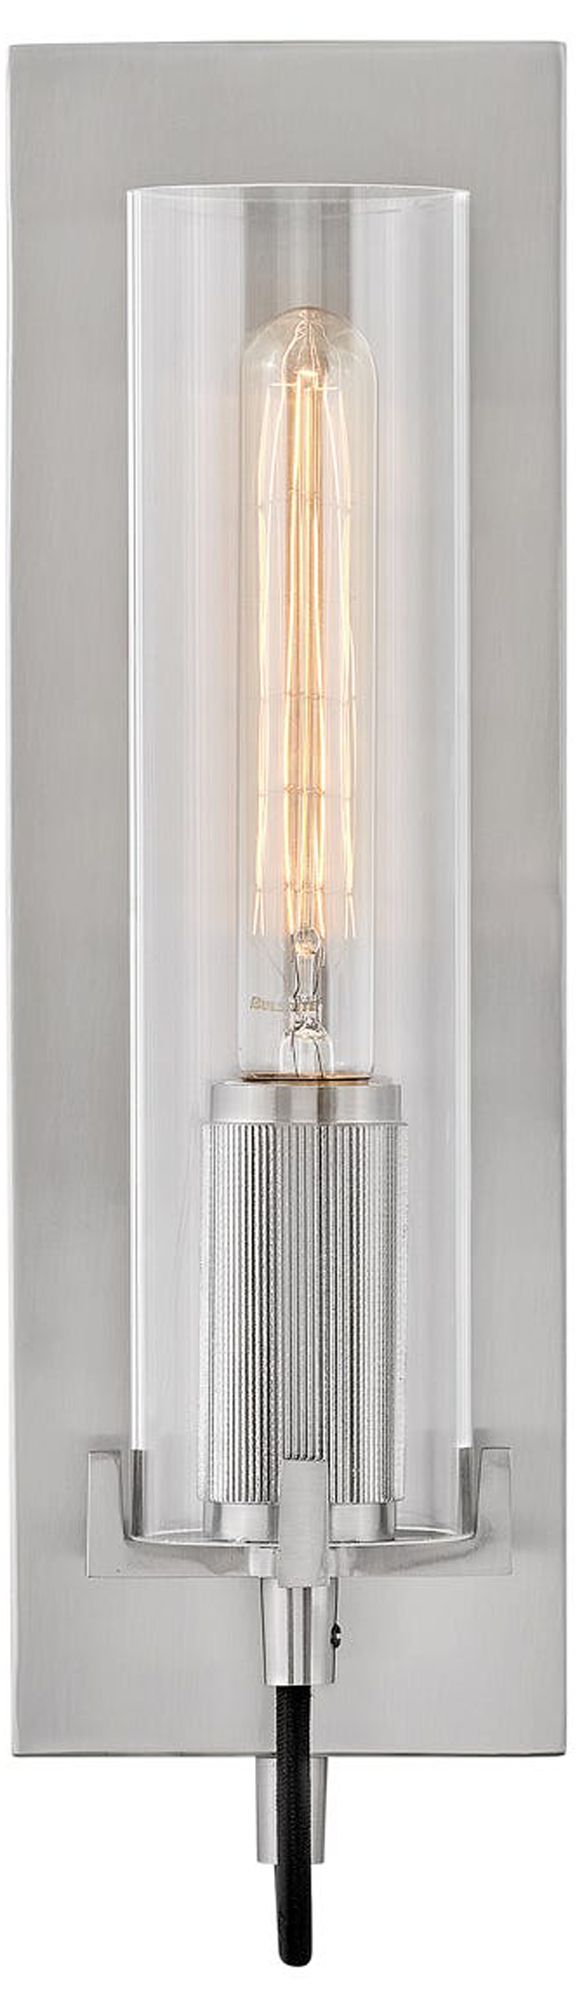 Ryden 16 1/4" High Nickel Wall Sconce by Hinkley Lighting